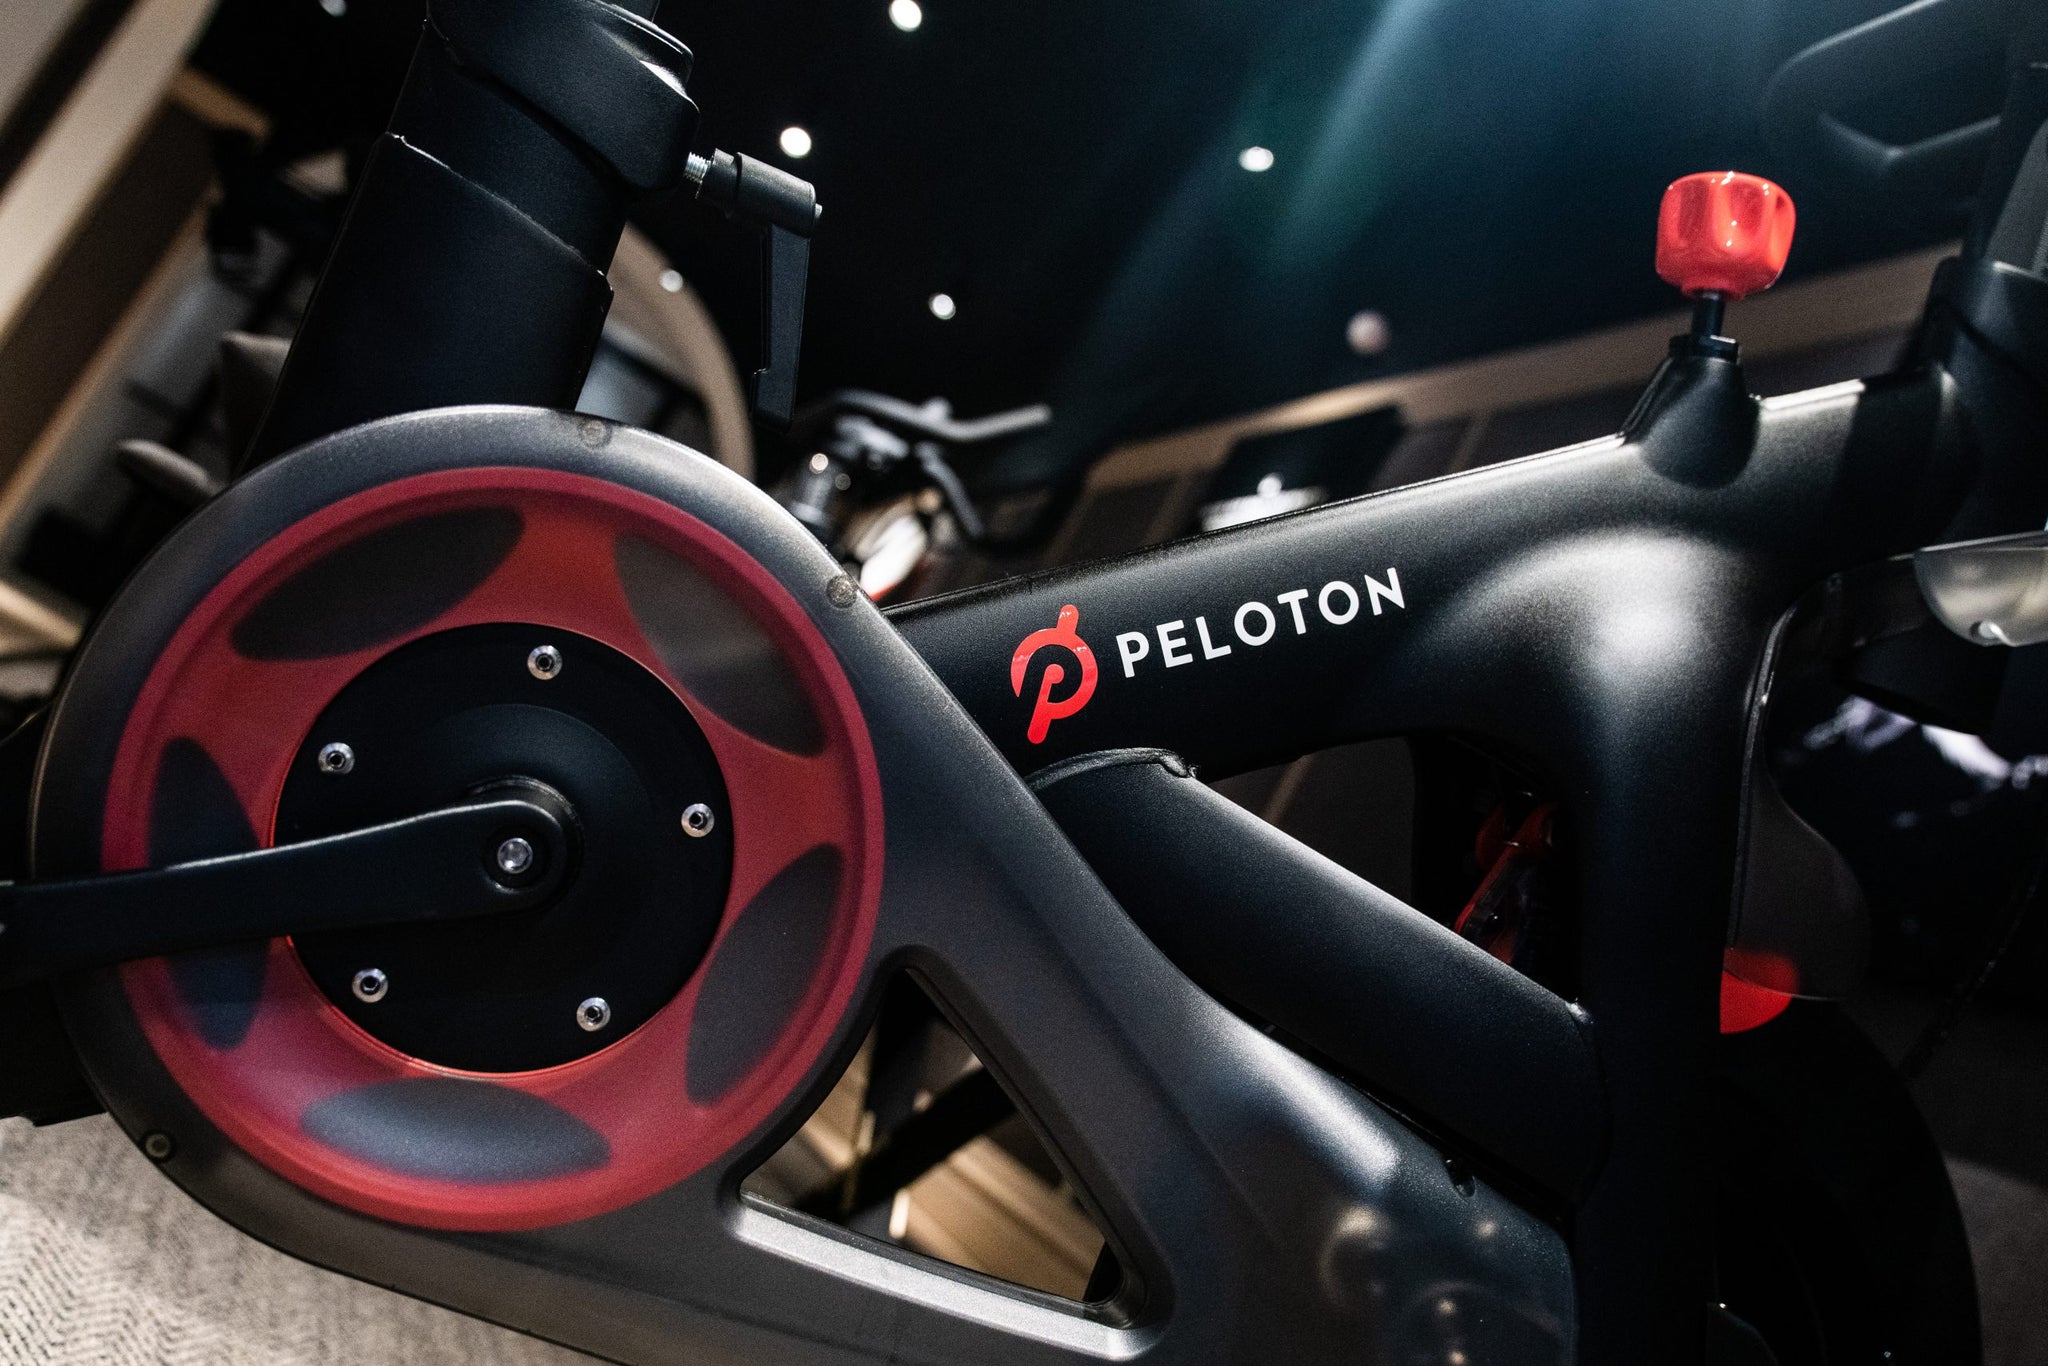 Extended Chase Sapphire cardholders can use this Peloton benefit